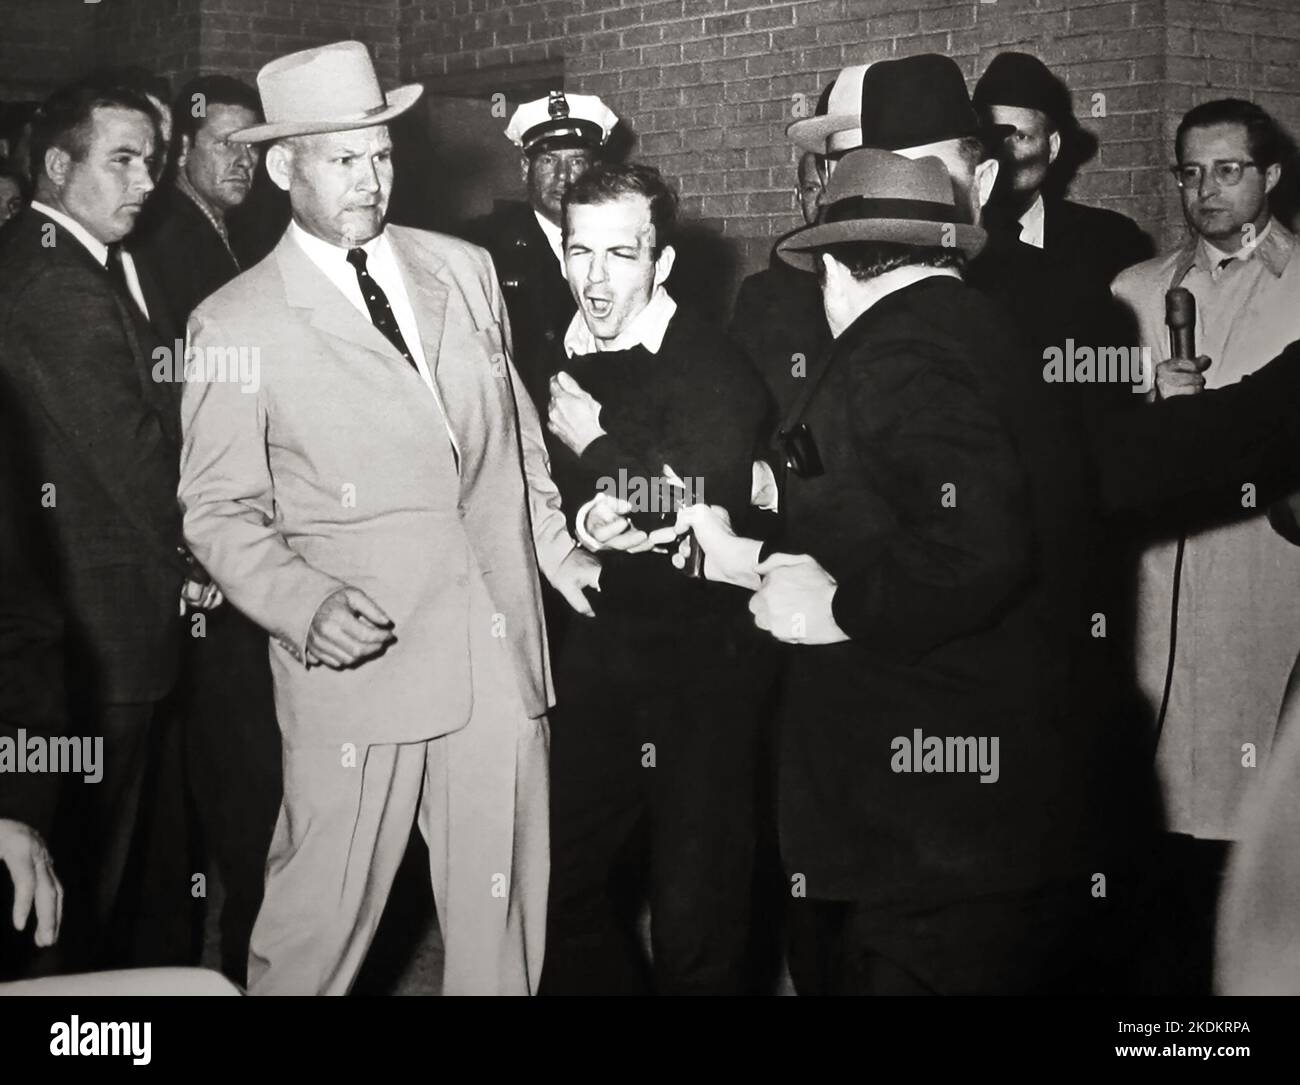 Jack Ruby (52) shoots Lee Harvey Oswald (24). Winner of the 1964 Pulitzer Prize for Photography - Author Robert H. Jackson. Stock Photo